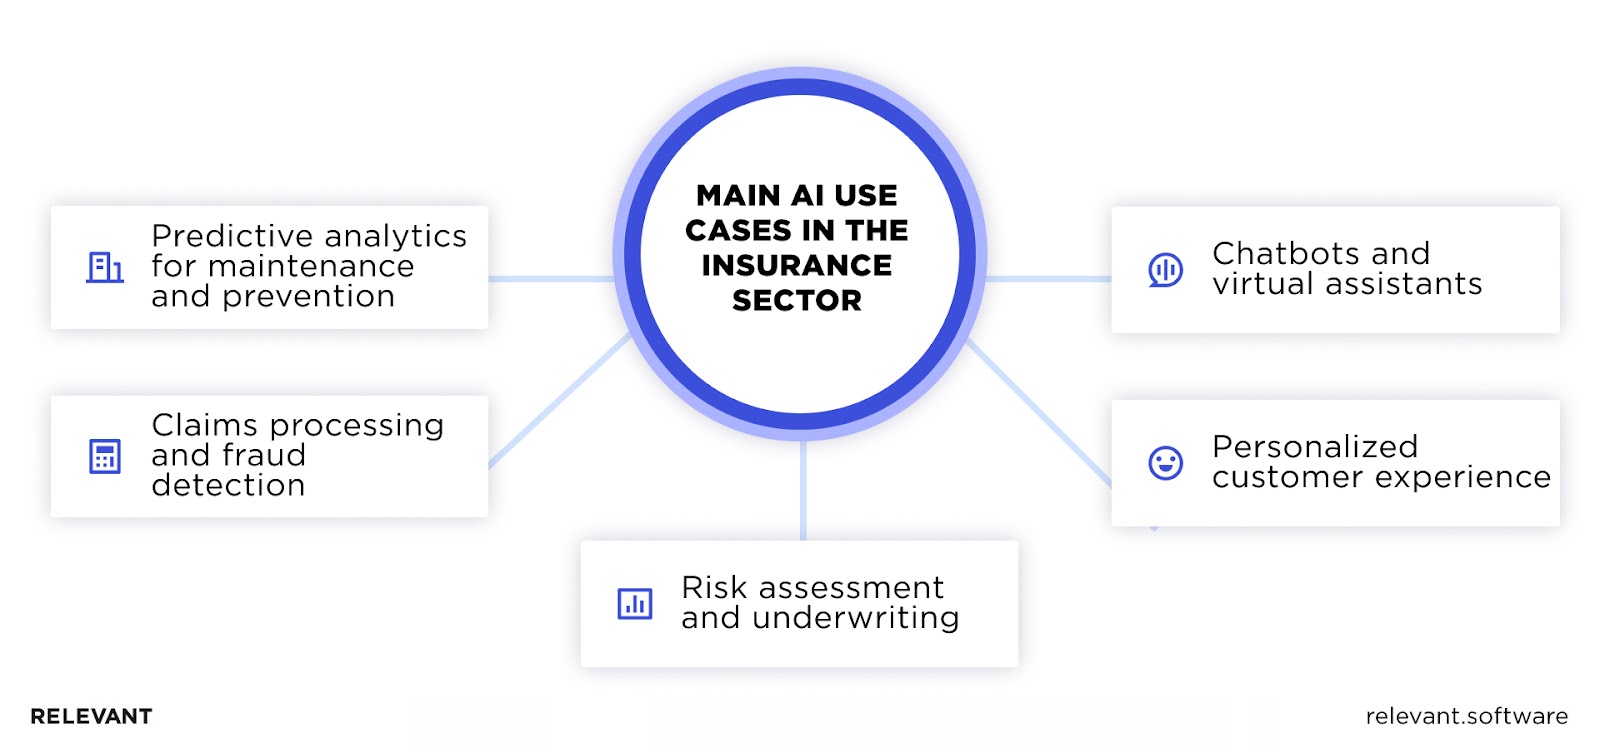 AI Use Cases in Insurance